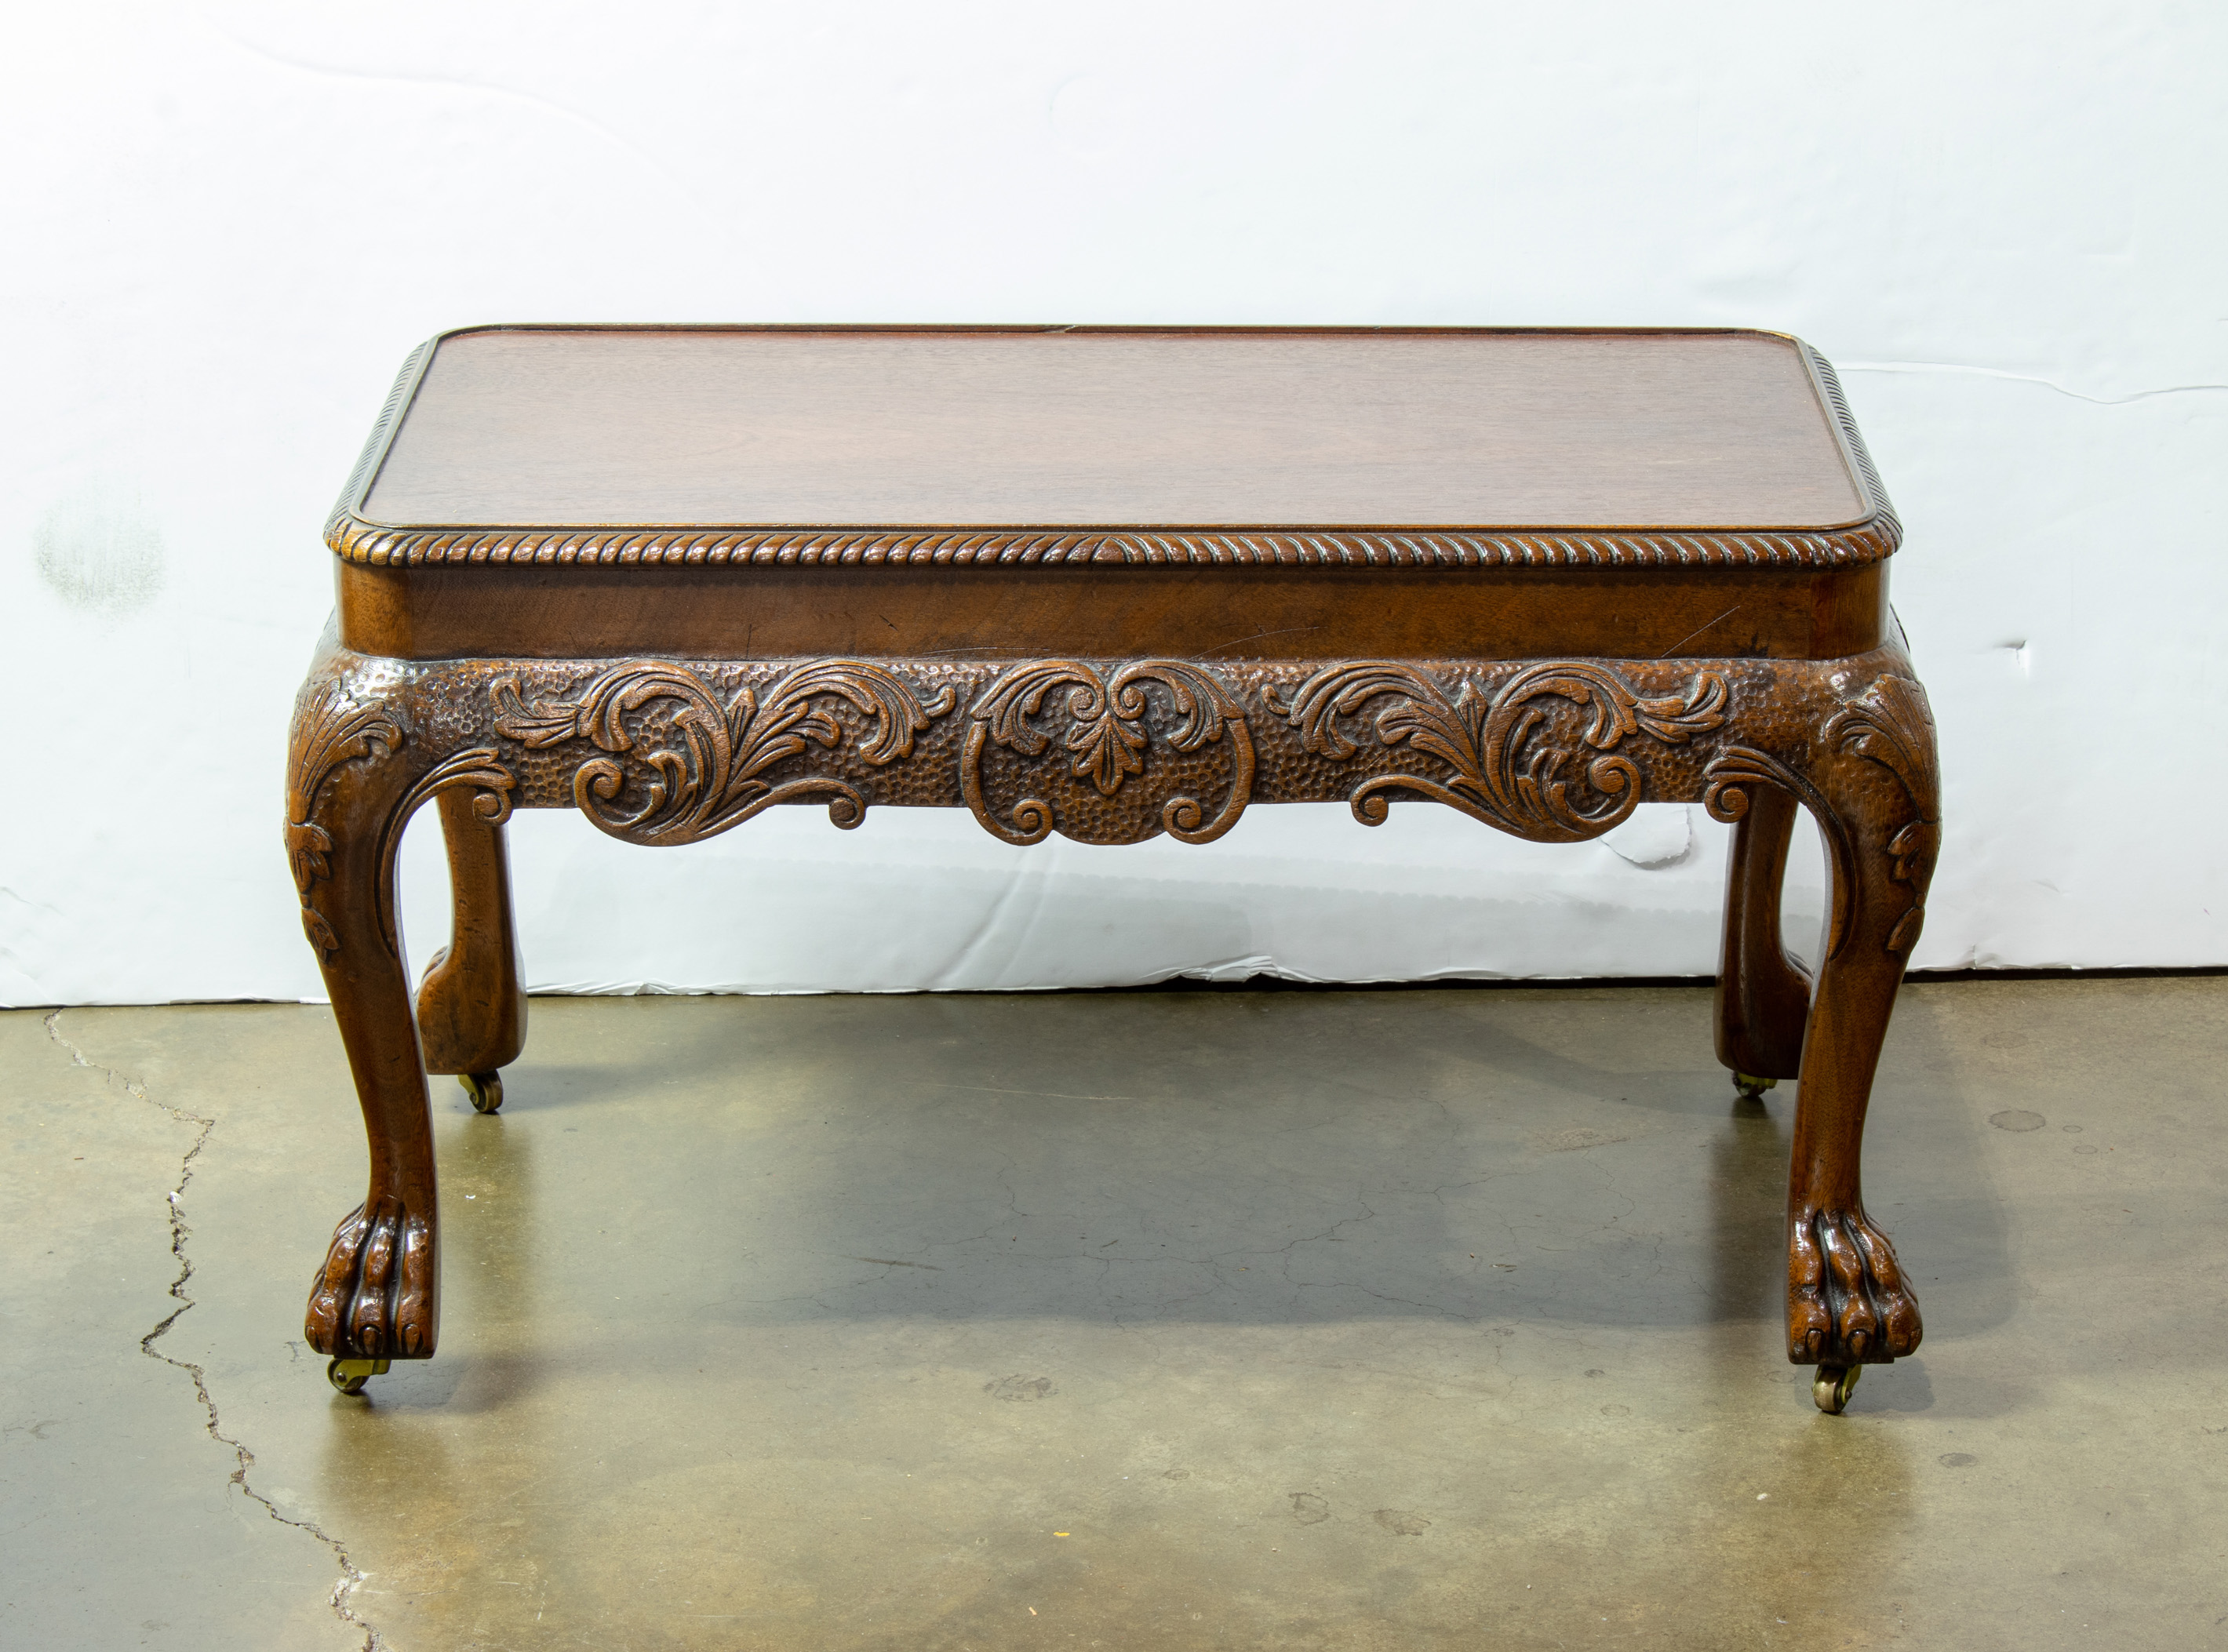 A CLASSICAL STYLE MAHOGANY BENCH